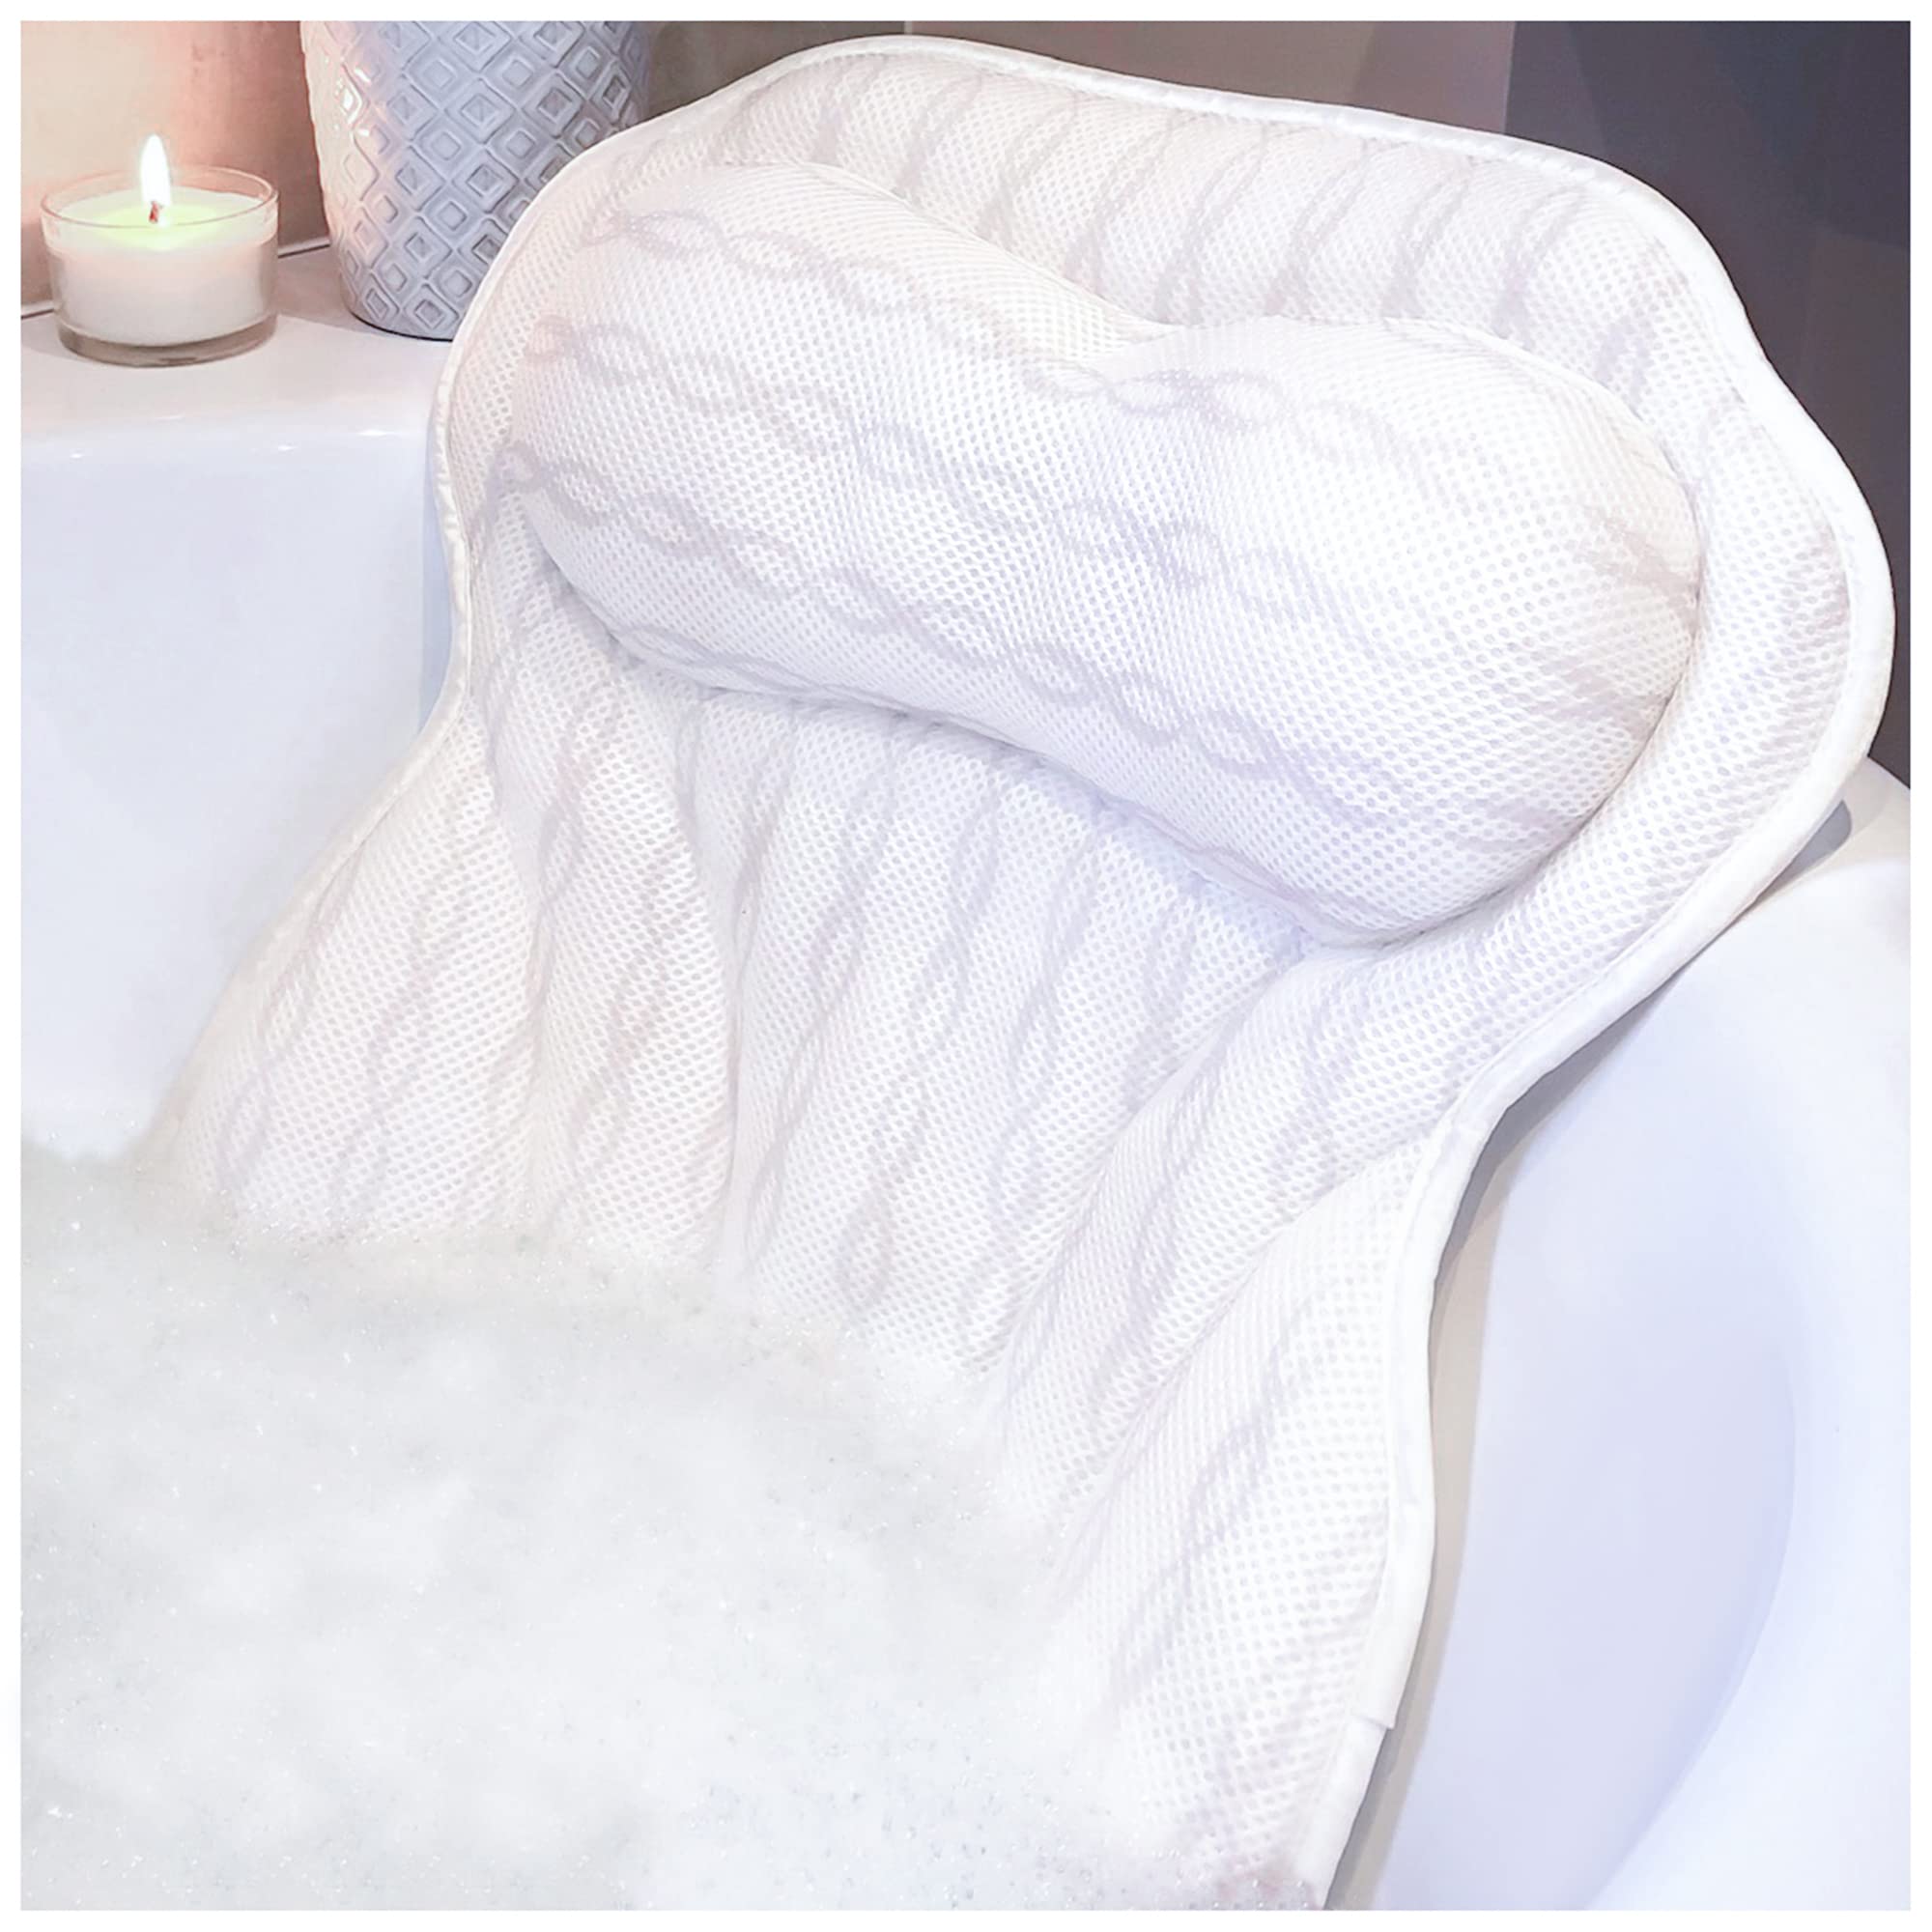 Branded, Bath & Body, Luxury Bath Pillow Relieve Stress And Rejuvenate  Wneck And Head Rest Support